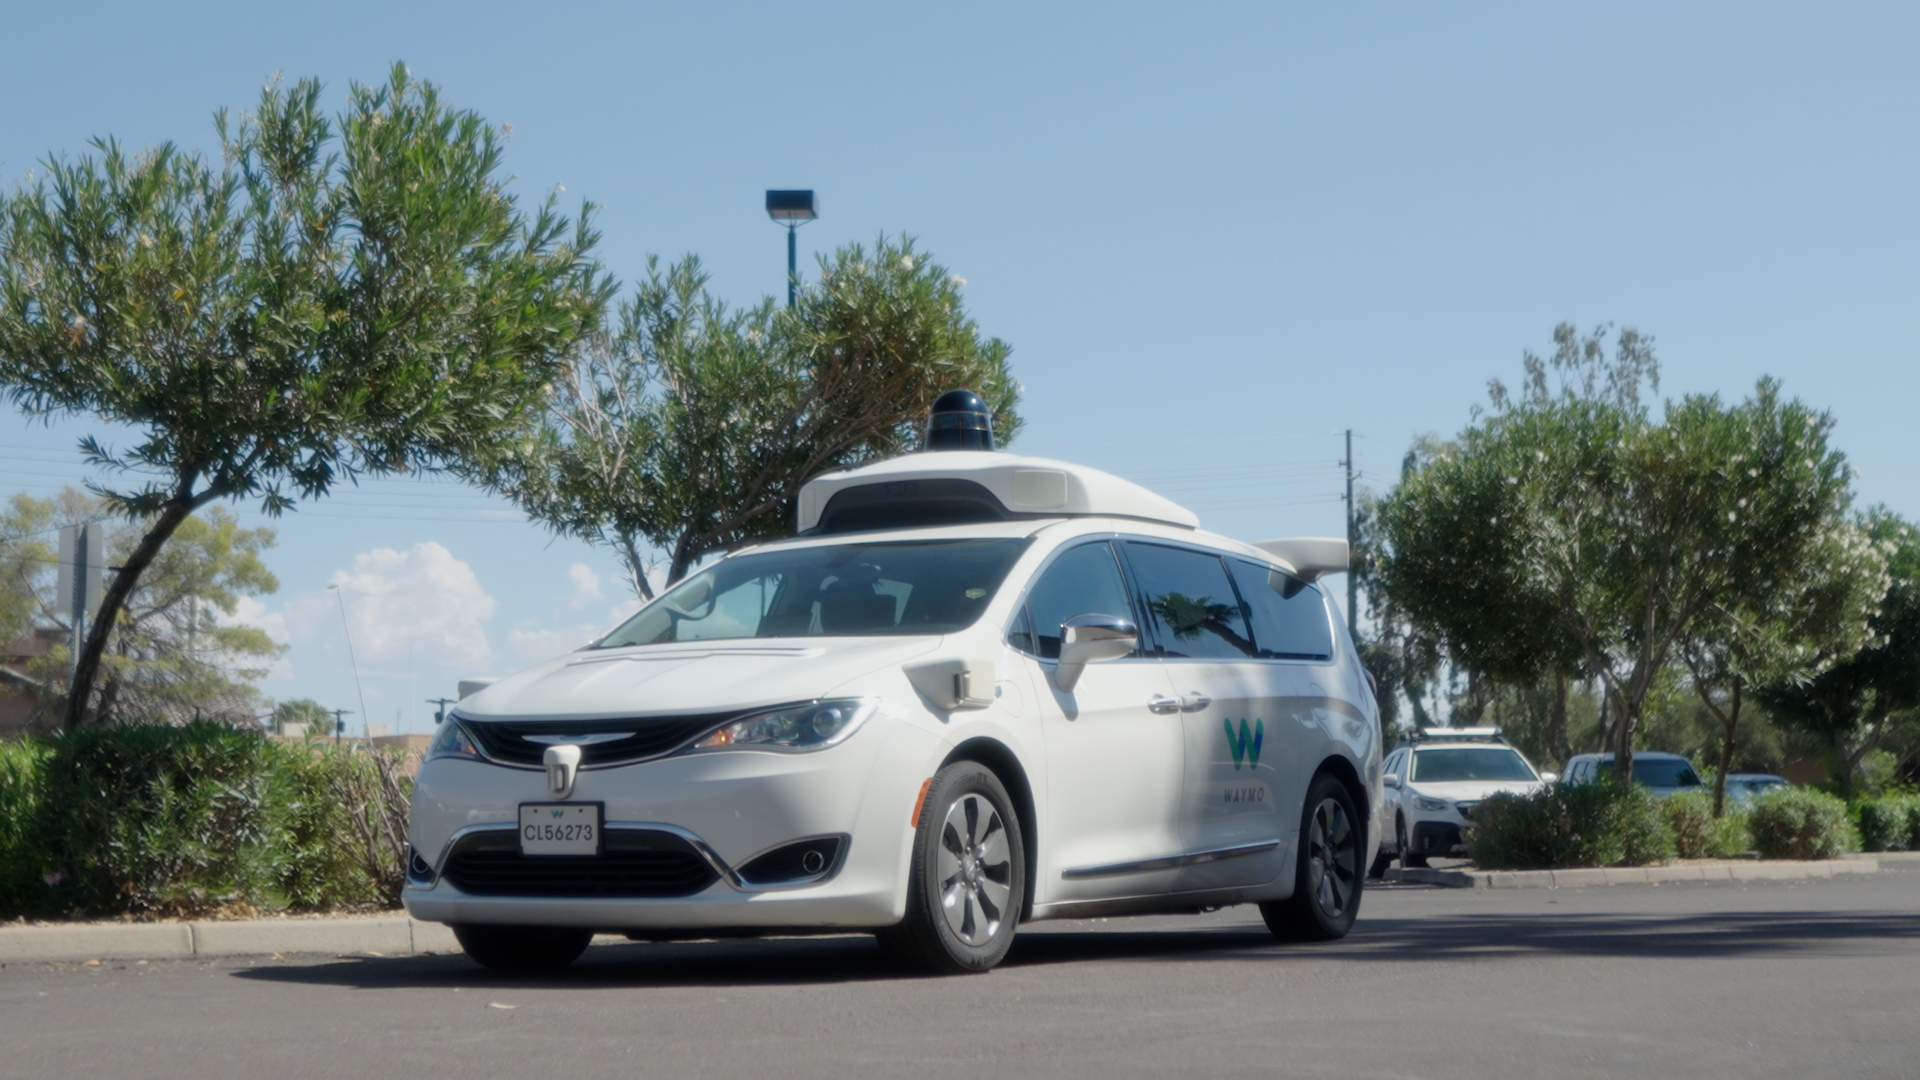 The Places You’ll Go: Discover Chandler in an Autonomously Driven Waymo Vehicle